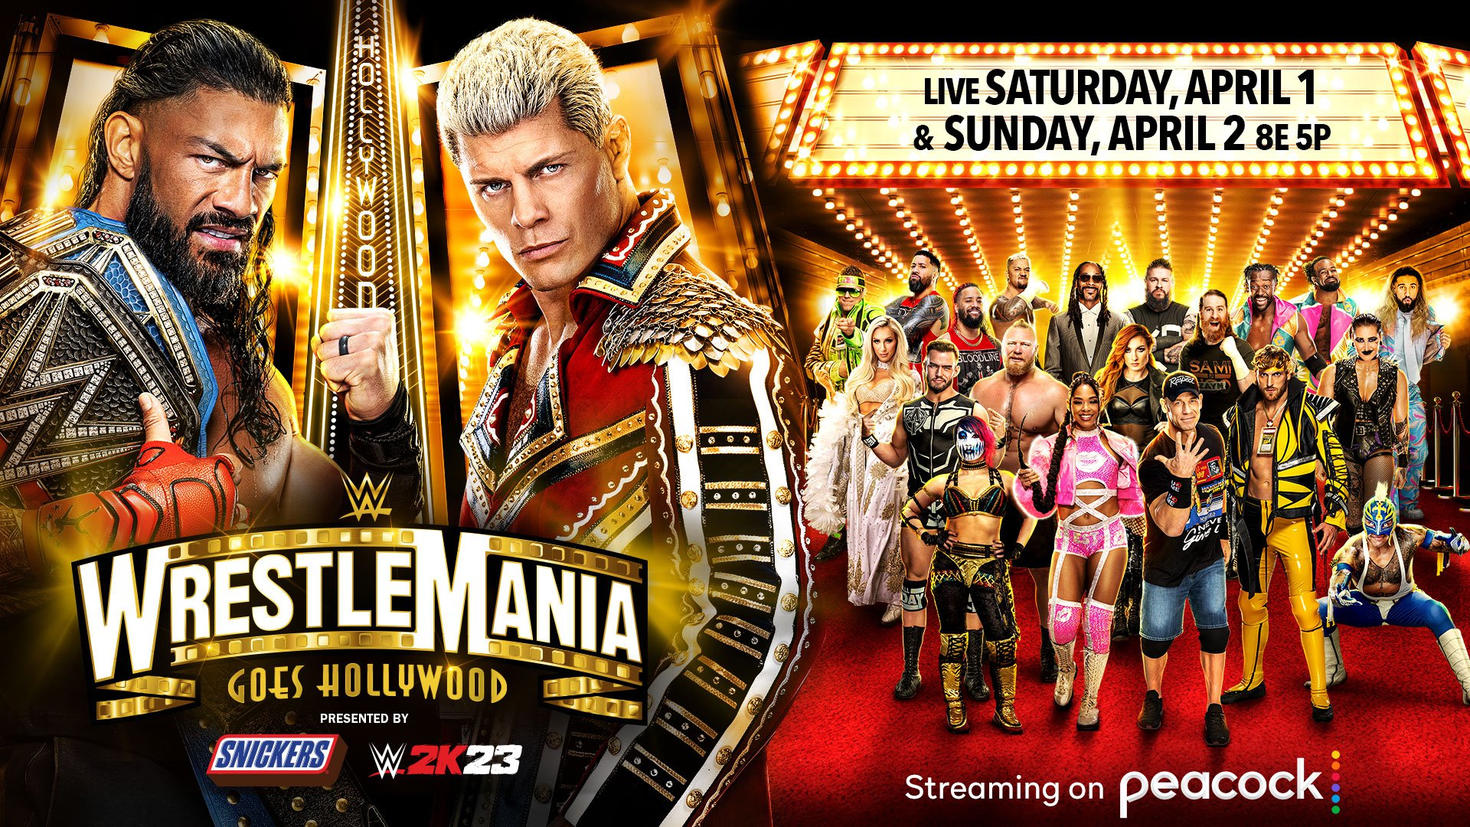 Wwe Wrestlemania 39 News Attendance Live Gate Ppv Buys More On Cody Rhodes Vs Roman Reigns